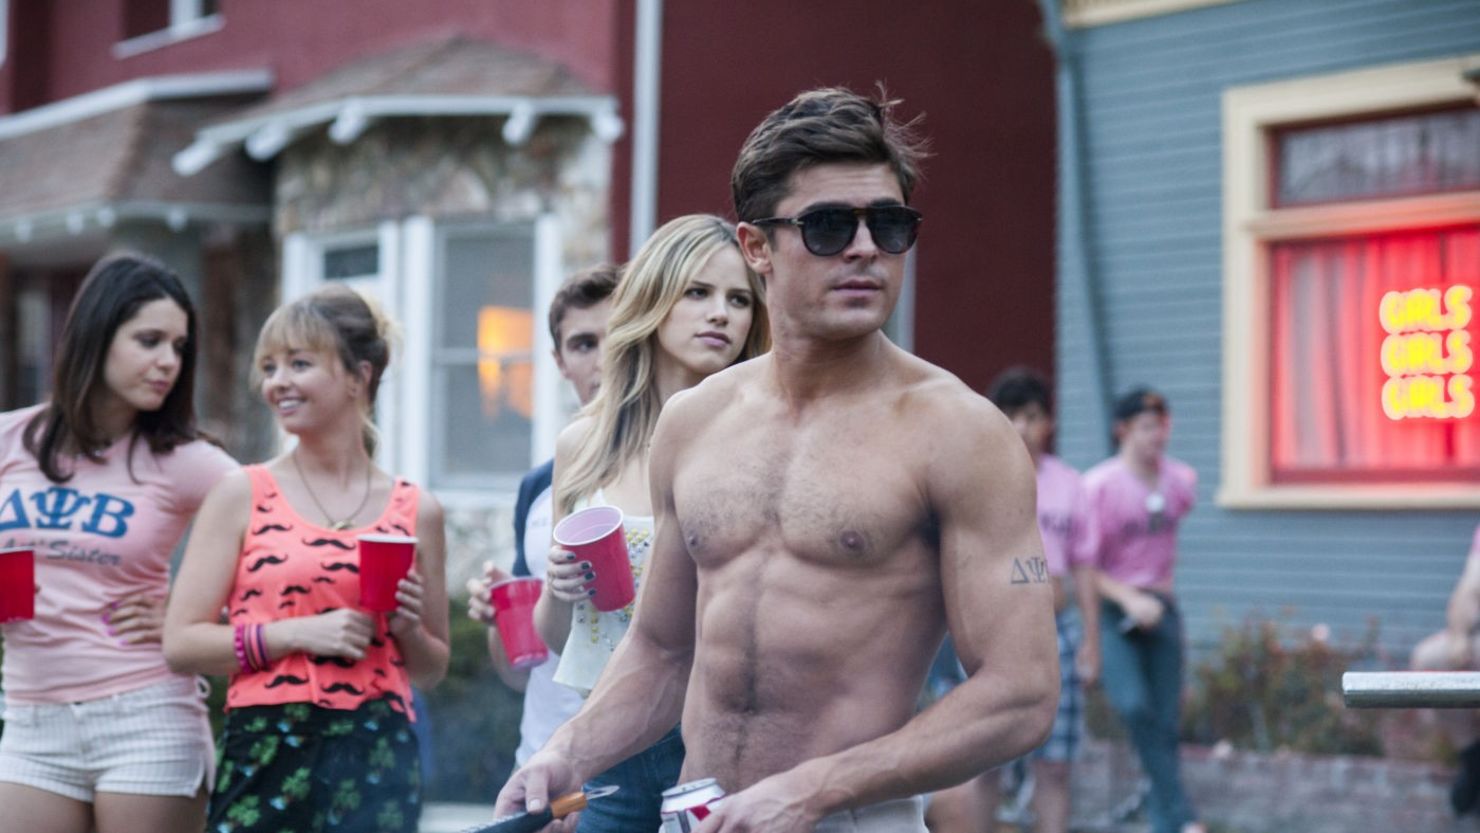 Zac Efron is sometimes shirtless in his frat-life comedy with Seth Rogen, "Neighbors."